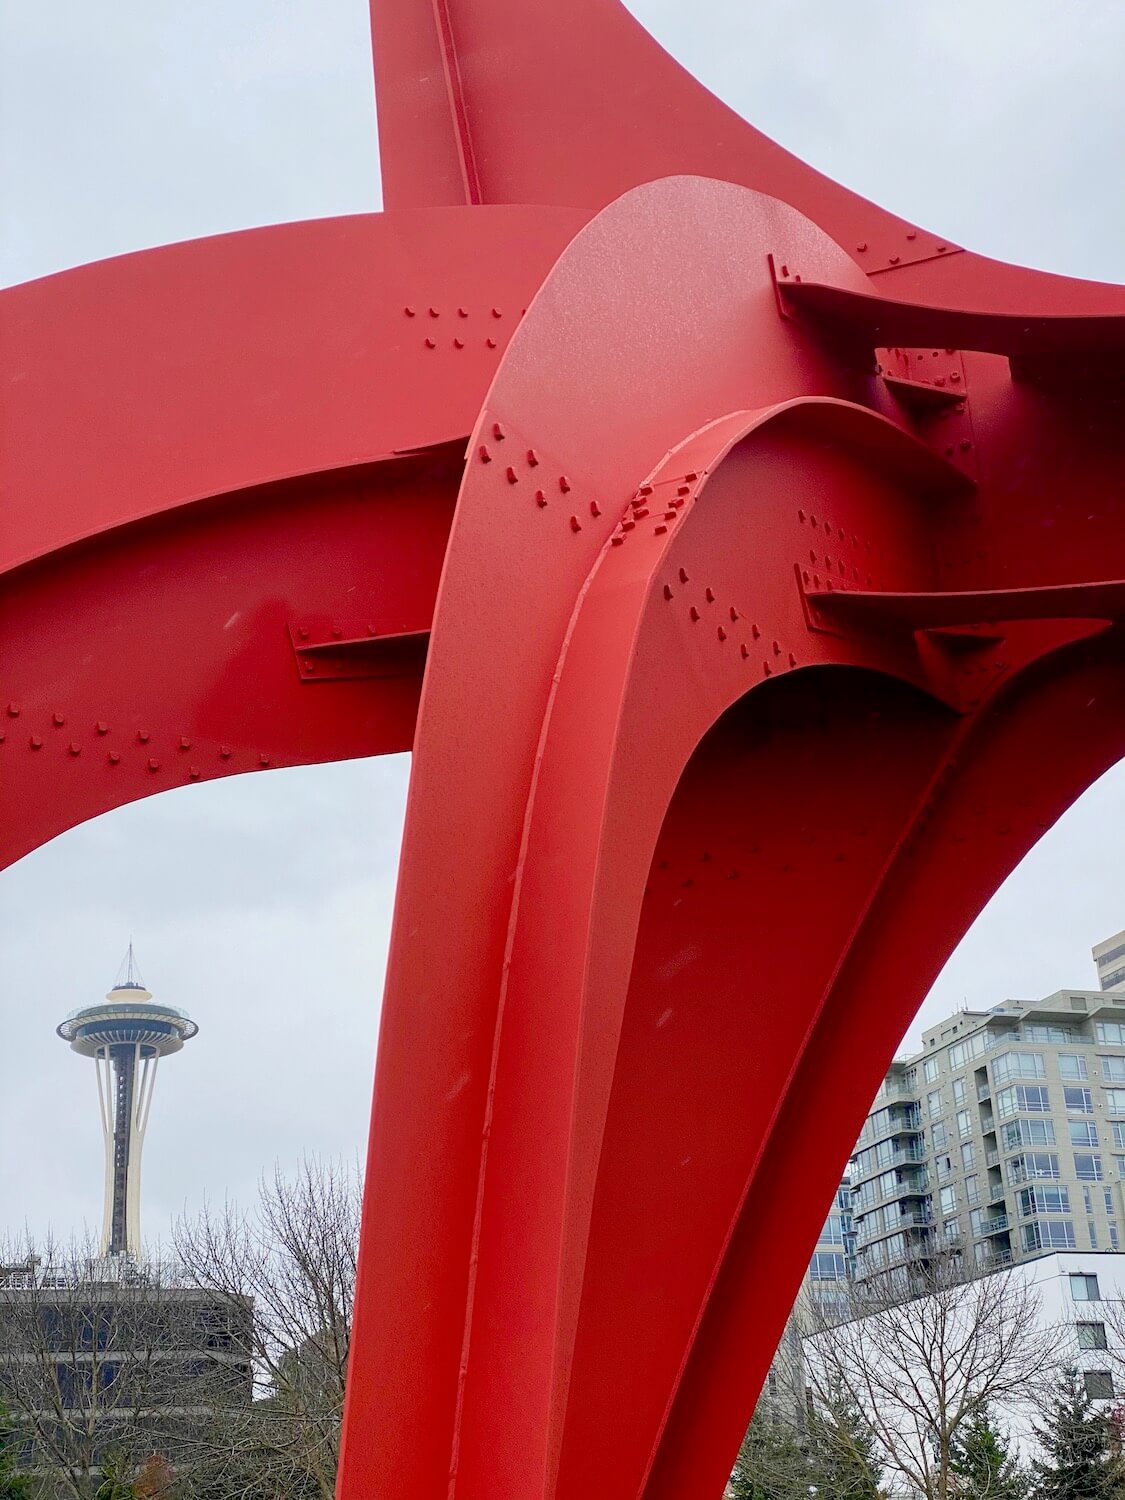 A bright red sculpture bends in a way that allows the iconic Seattle Space Needle to rise up in the background.  The red structure is put together with a series of rivets holding the steel together.  